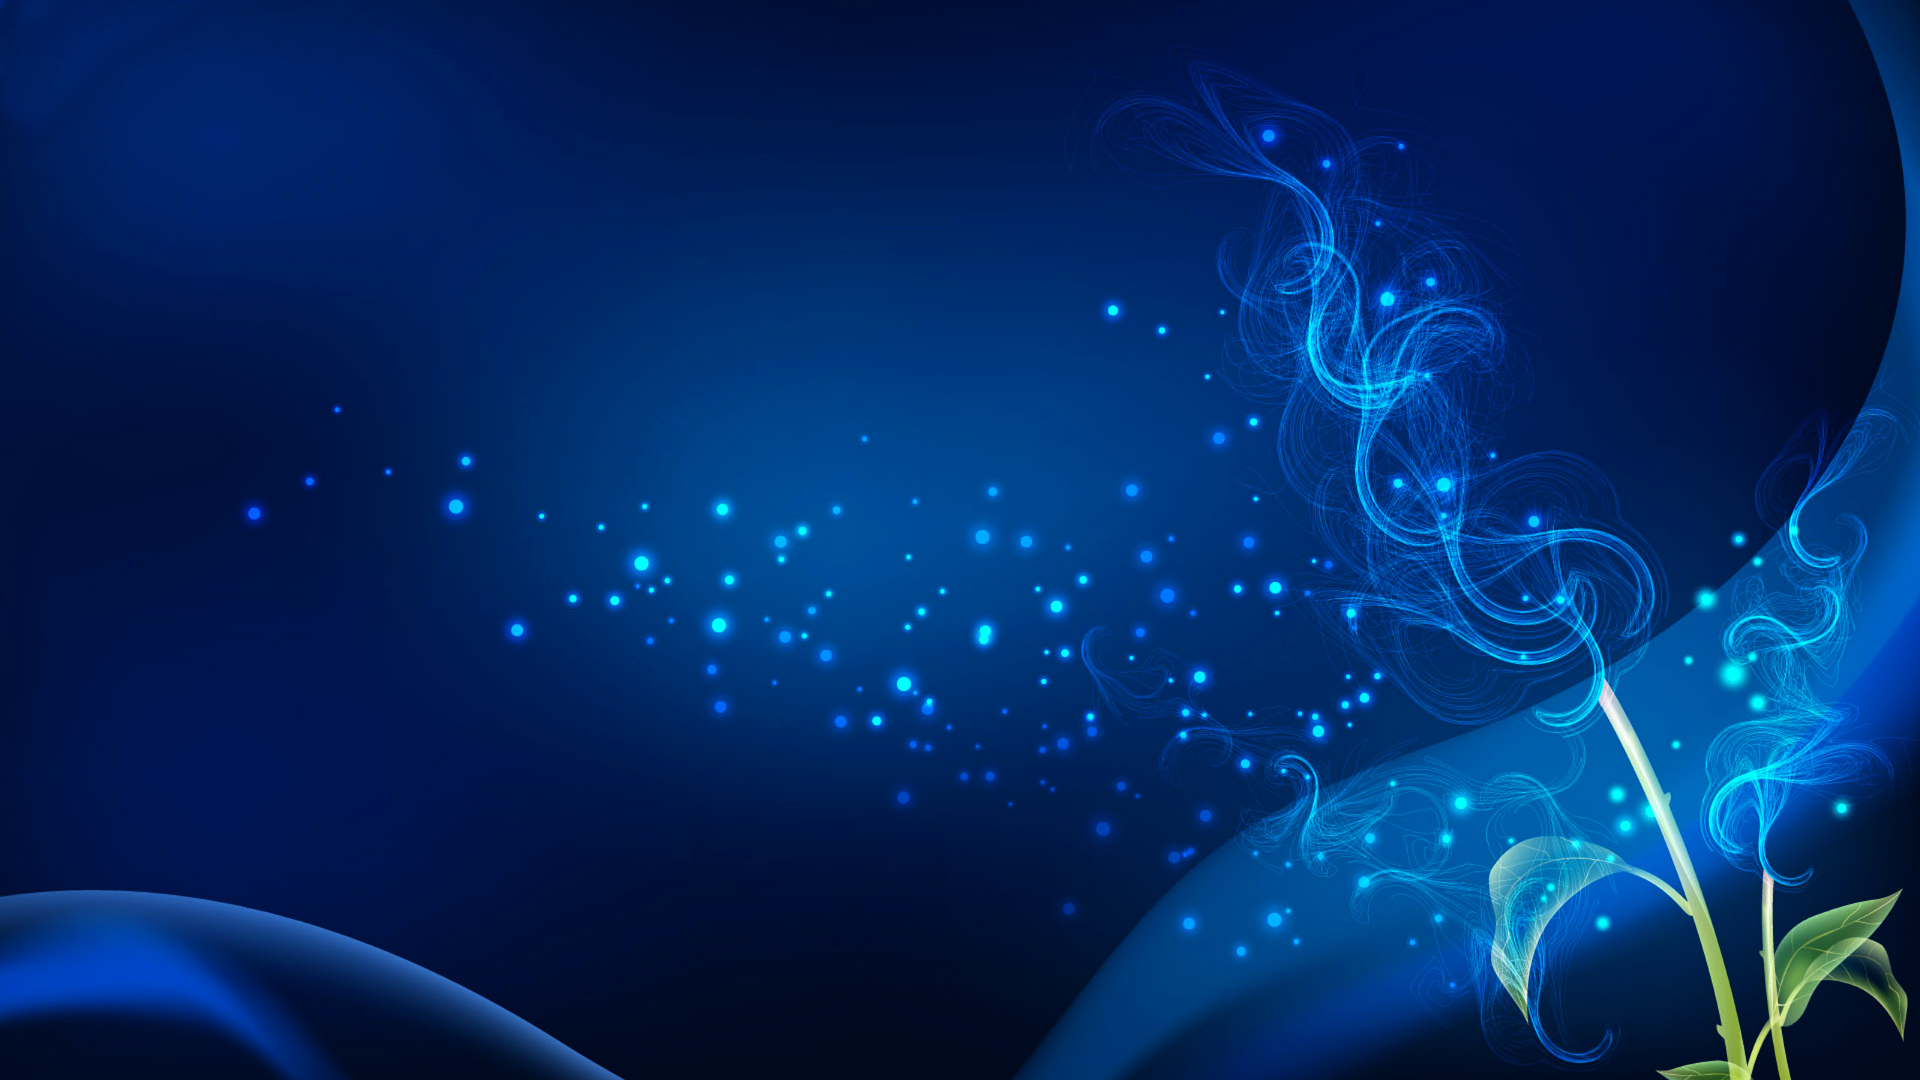 Abstract Blue Wallpaper Lines Motion Blur 1920x1080px